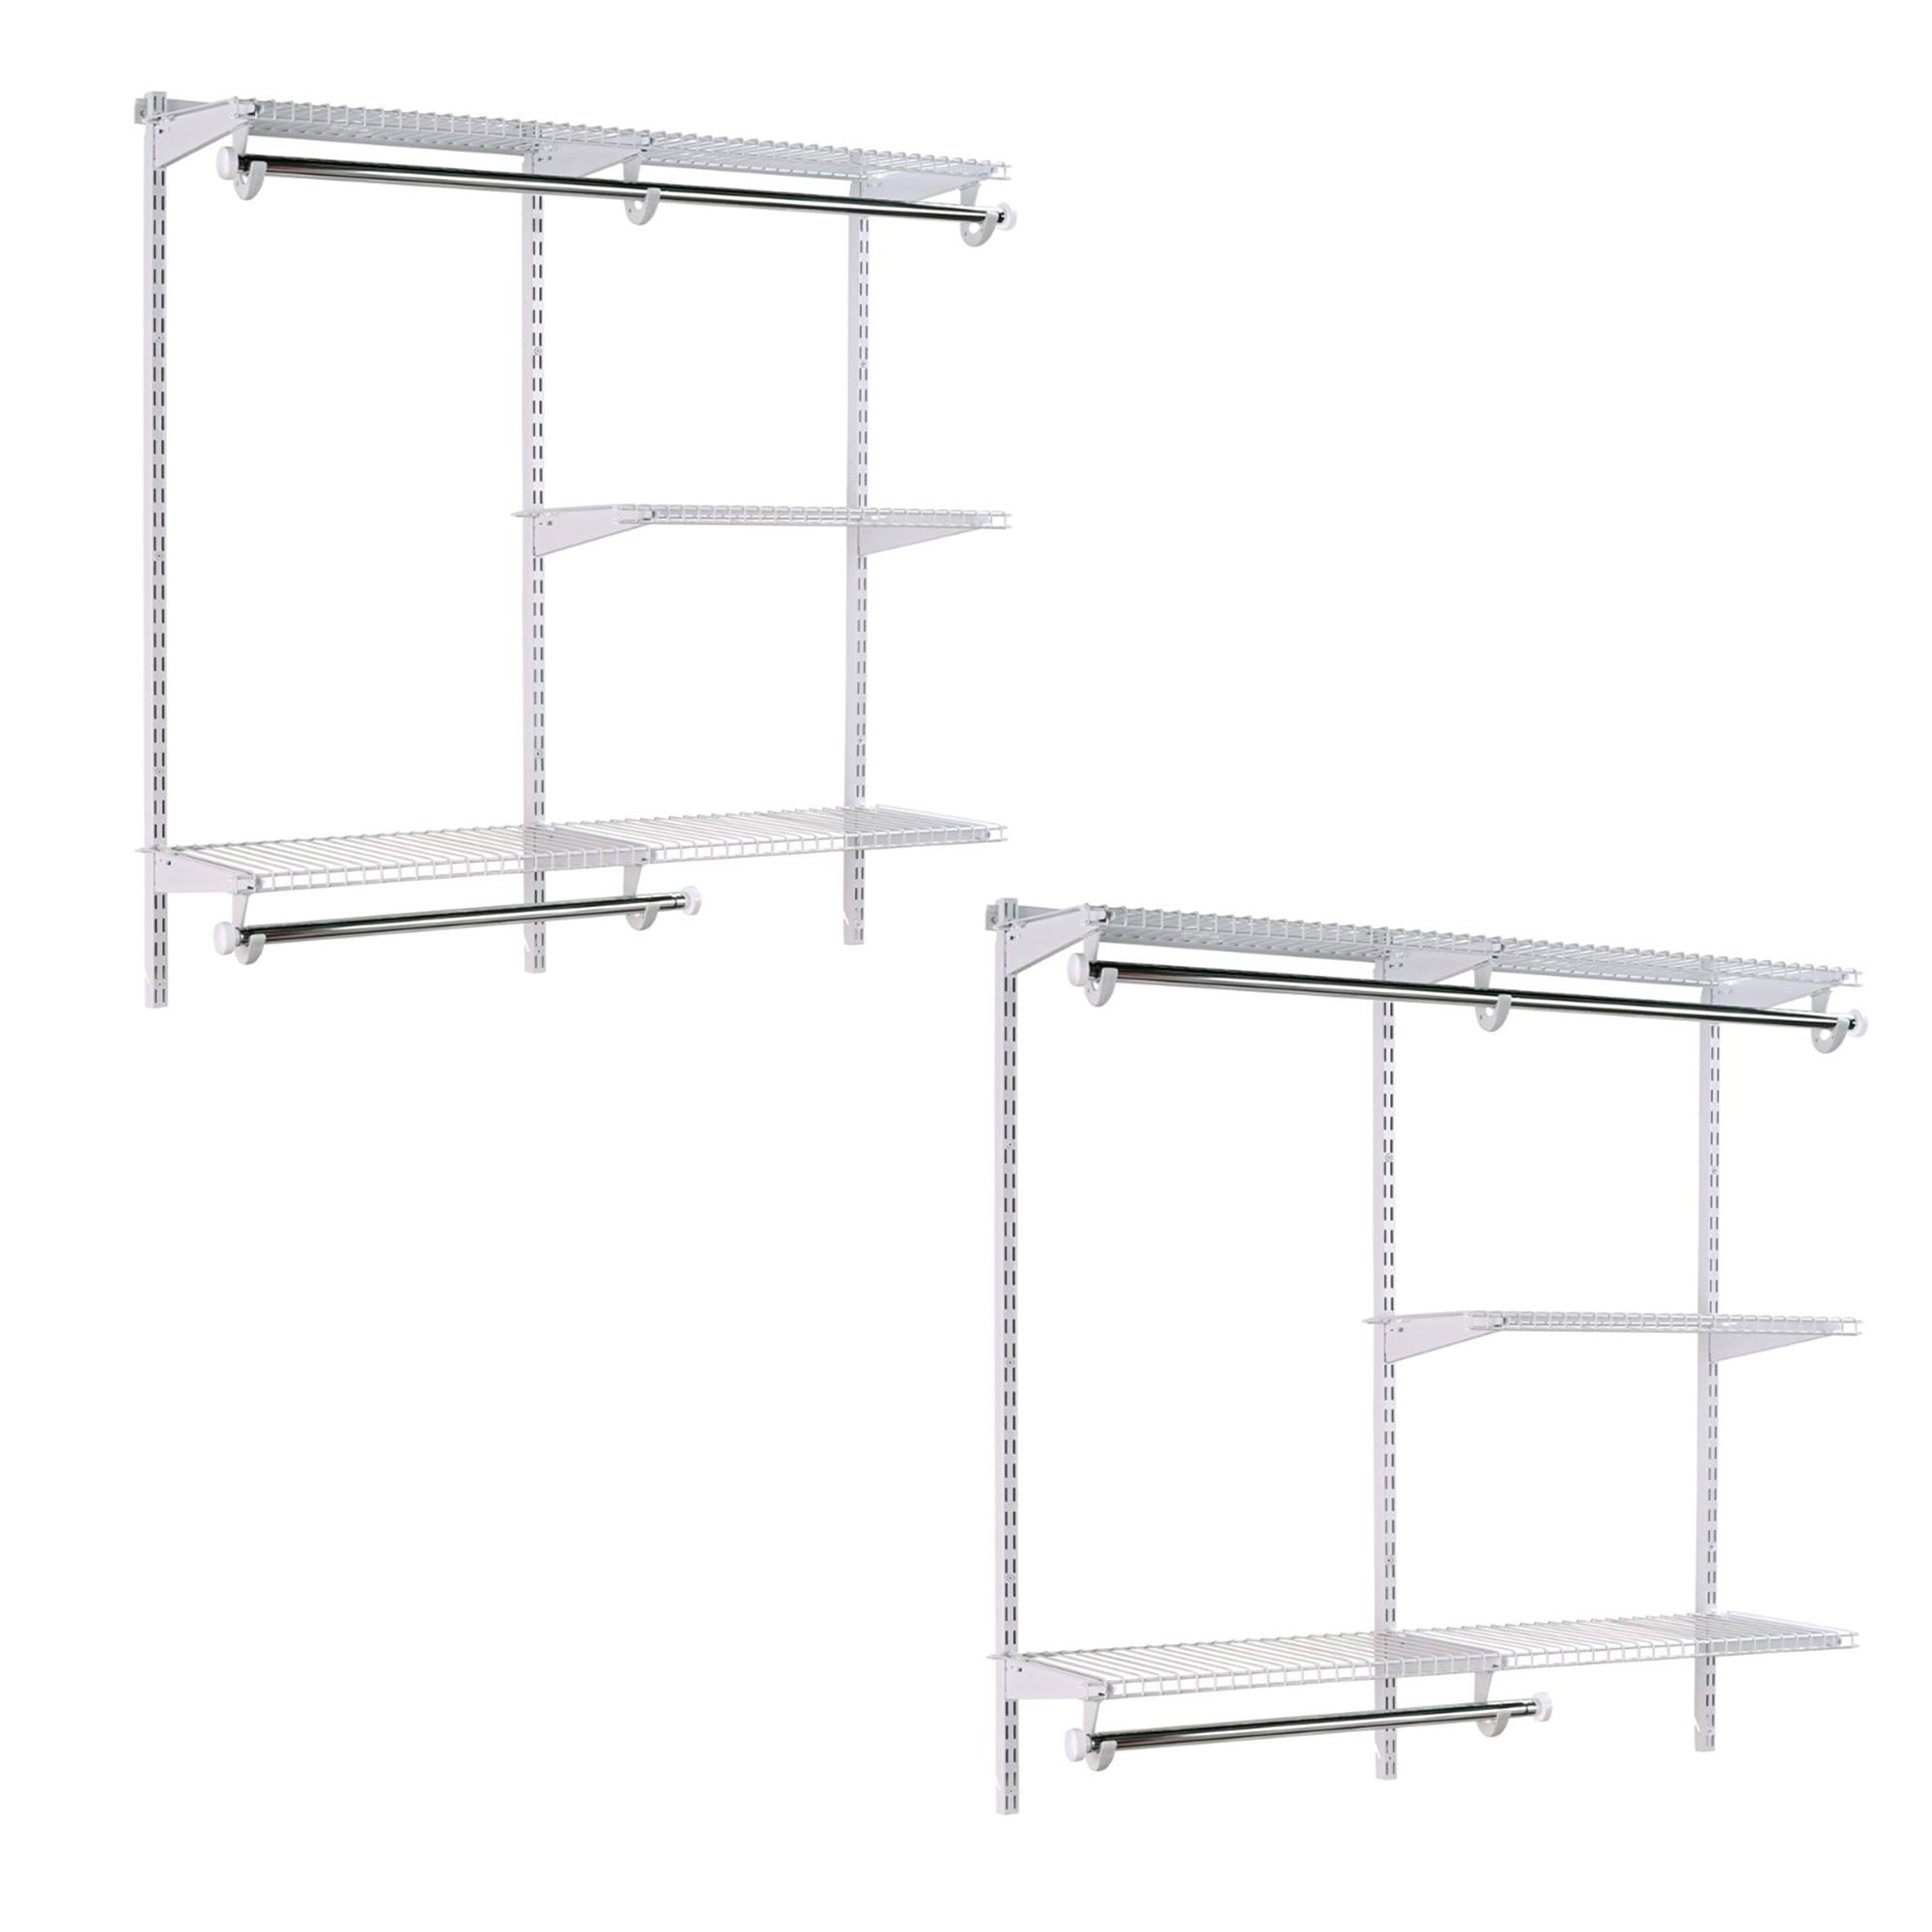 https://ak1.ostkcdn.com/images/products/is/images/direct/7420672d6731bc30cf8f17dc9f5fd5efddb1dcf9/Rubbermaid-Configurations-4-to-8-Ft-Custom-Closet-Organizer-Kit%2C-White-%282-Pack%29.jpg